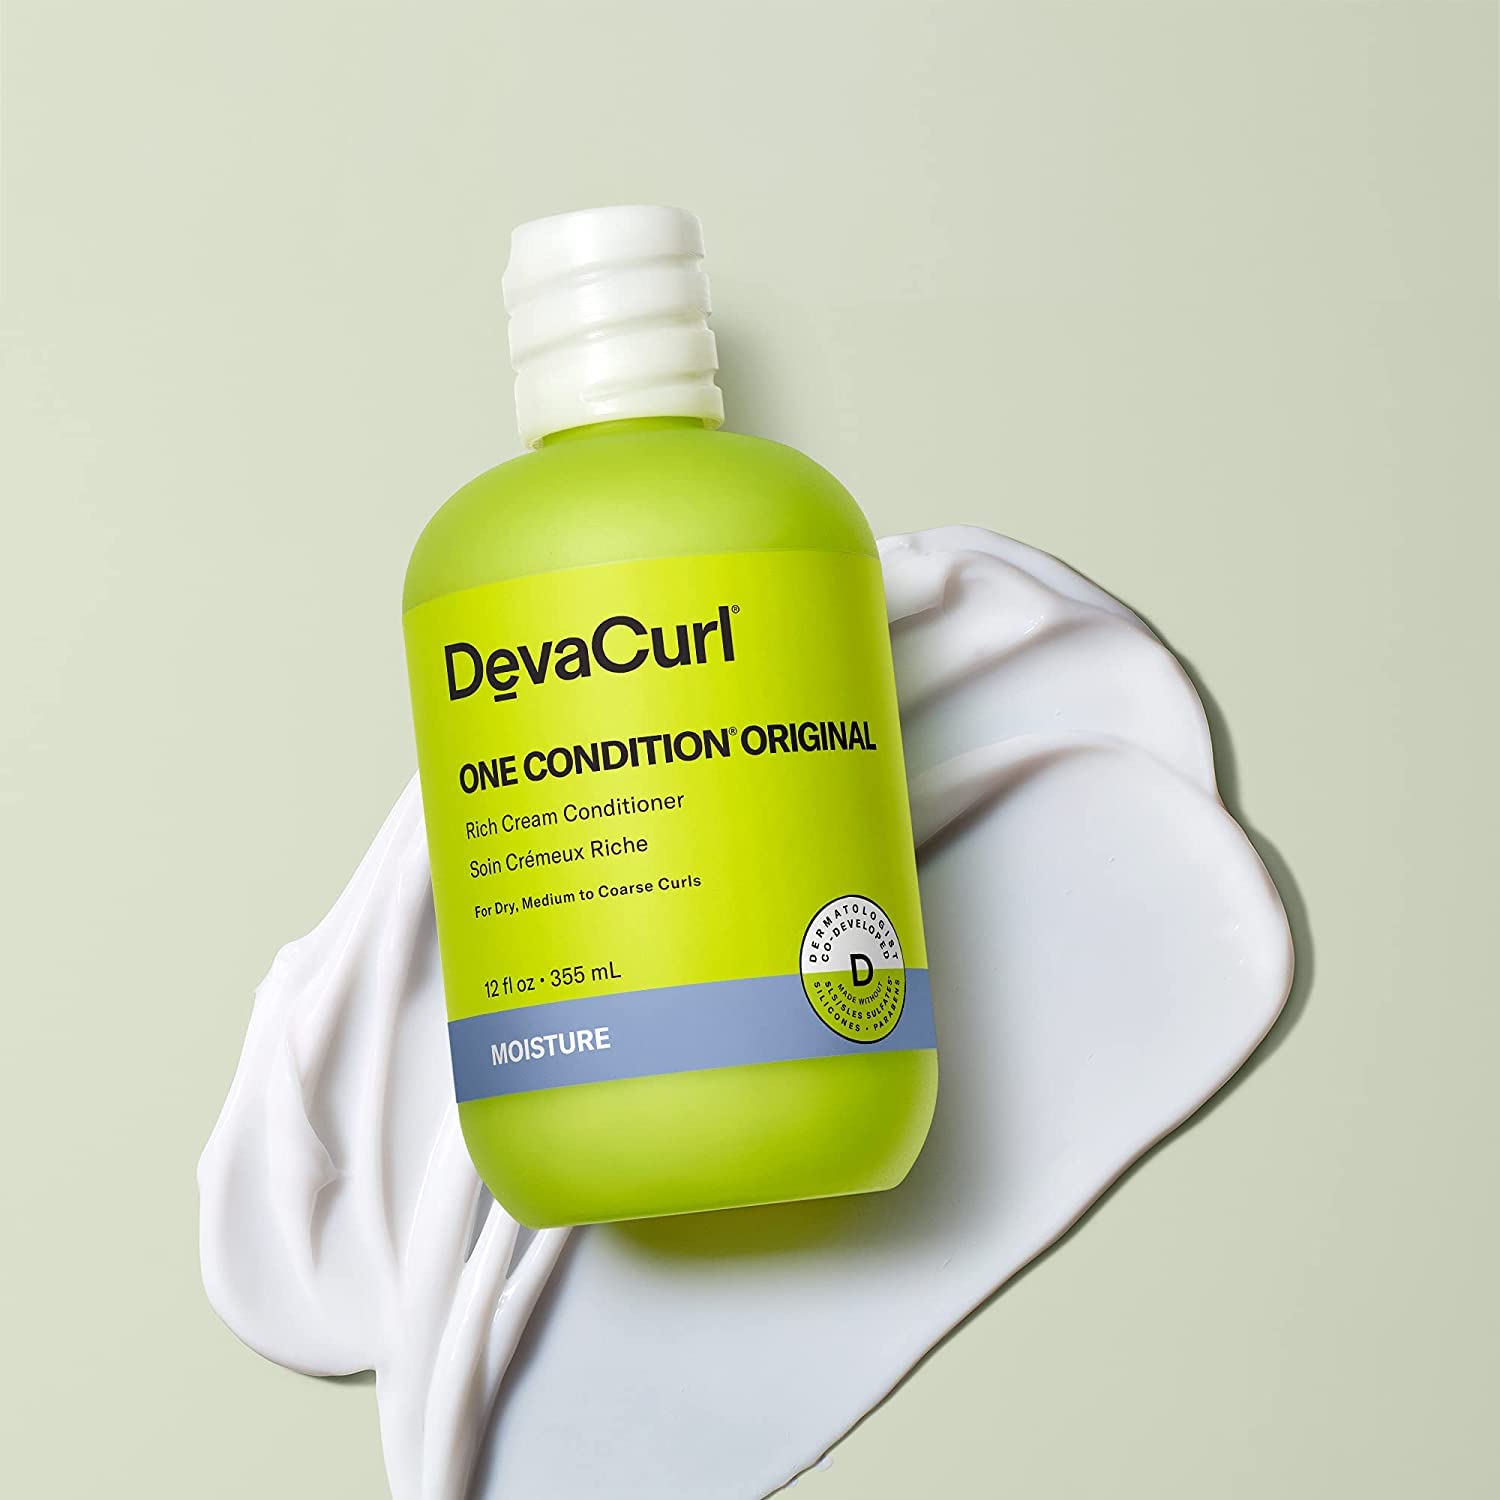 DevaCurl One Condition Original Rich Cream Conditioner | Control and Reduces Frizz | Fights Tangles | Leaves Curls Nourished